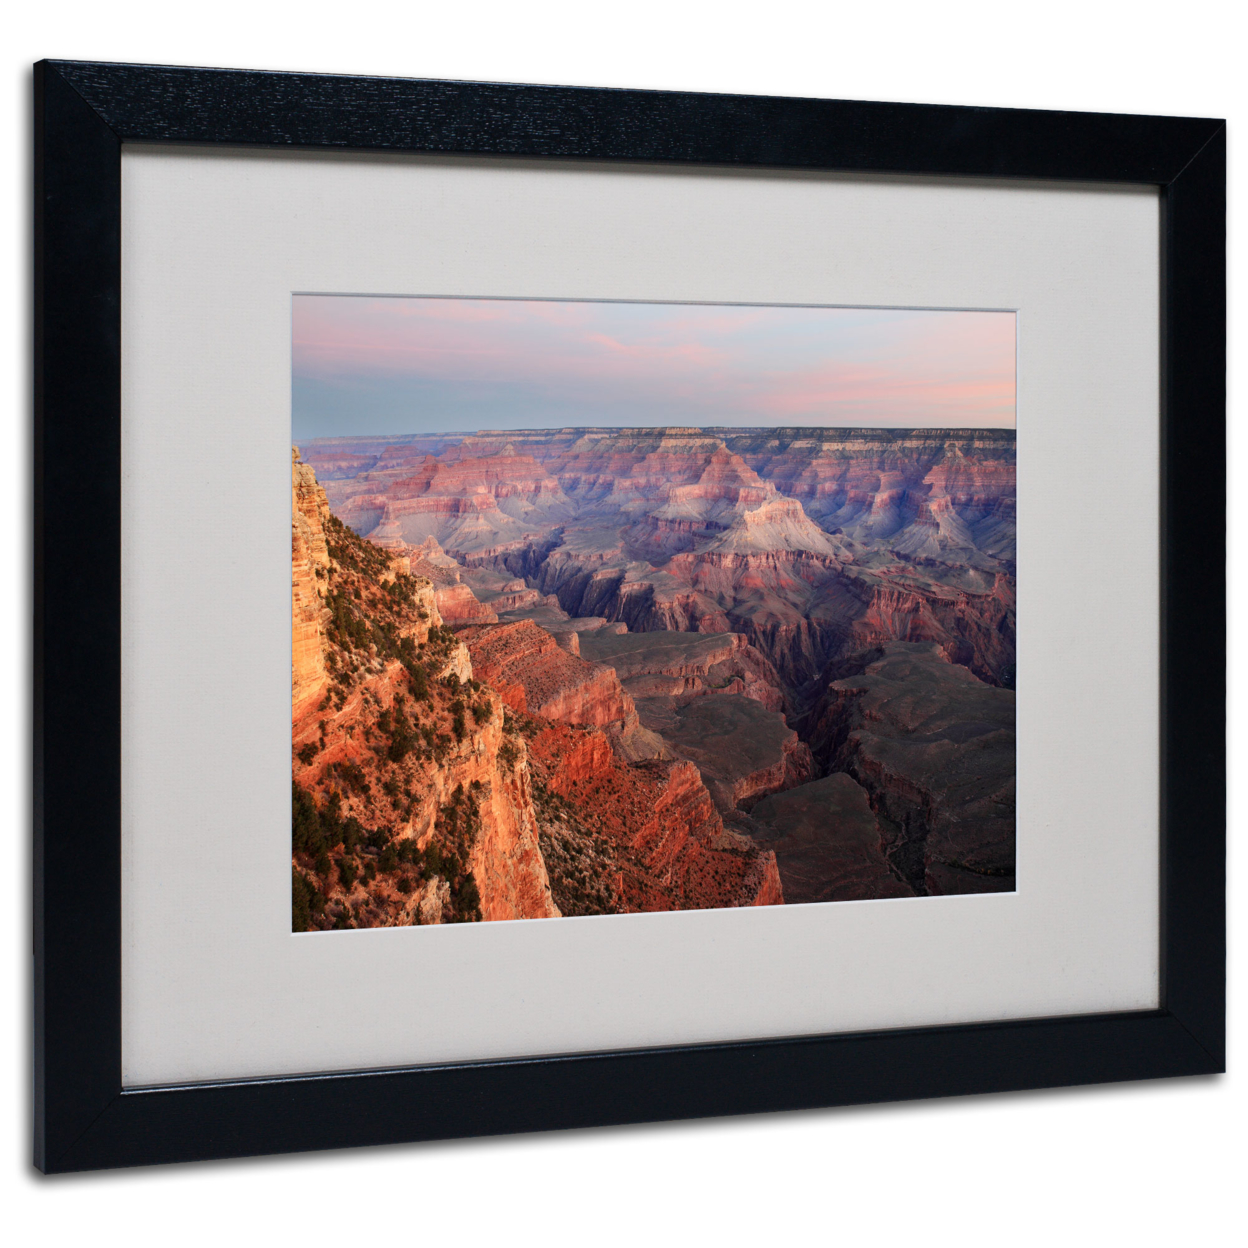 Pierre Leclerc 'Grand Canyon Sunrise' Black Wooden Framed Art 18 X 22 Inches